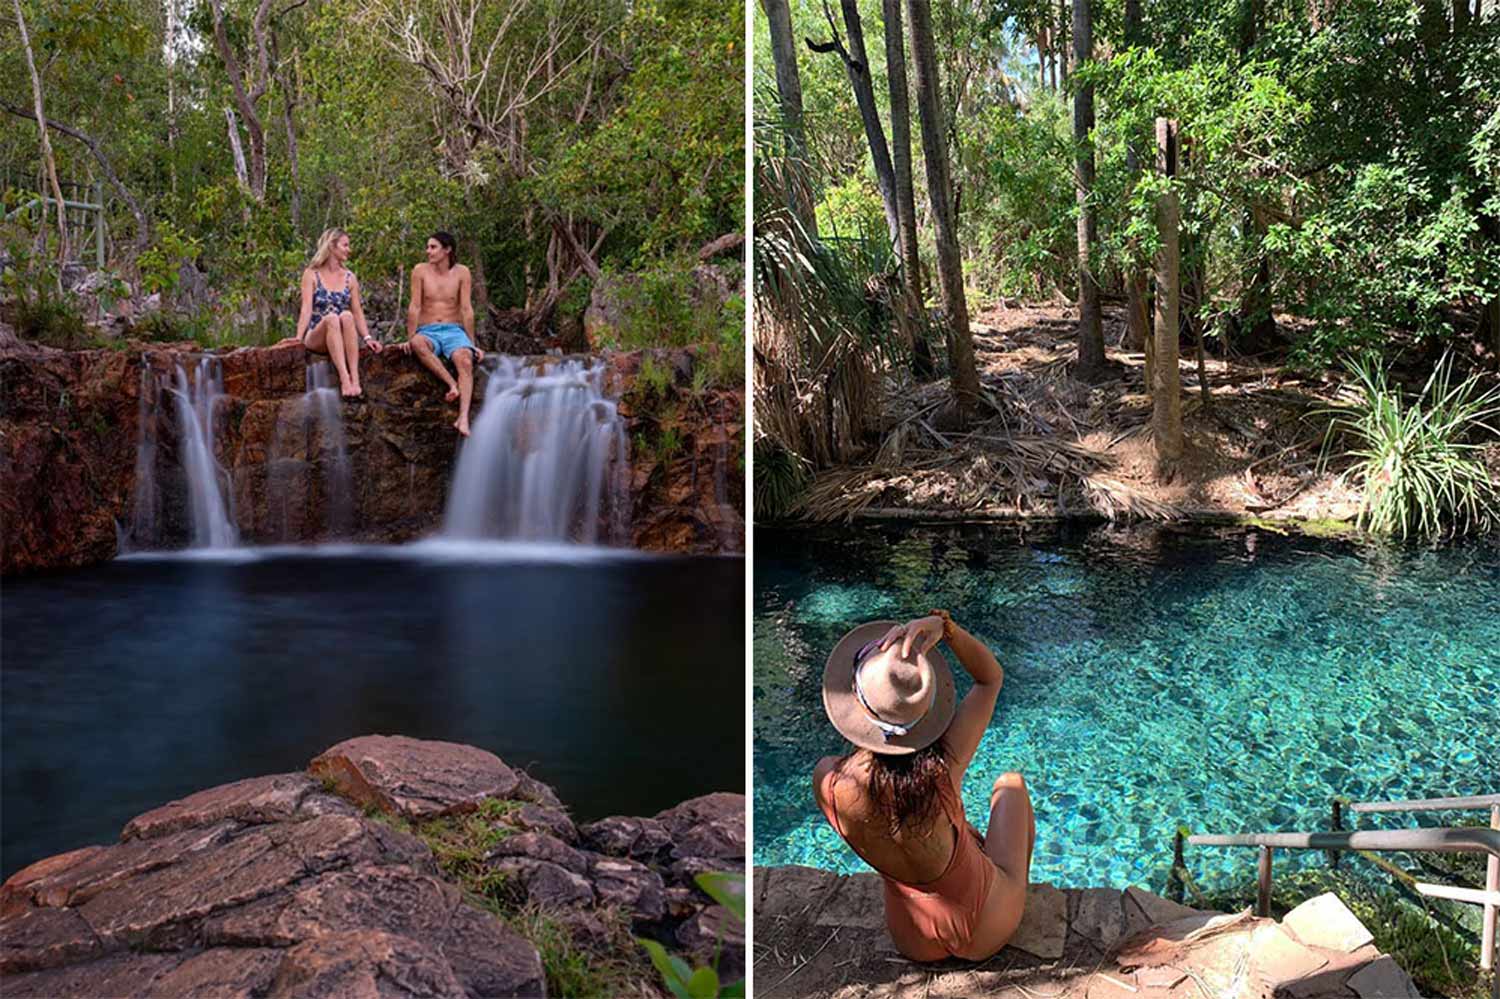 Australia To Charge Tourists $25 To See Instagram-Famous Water Holes